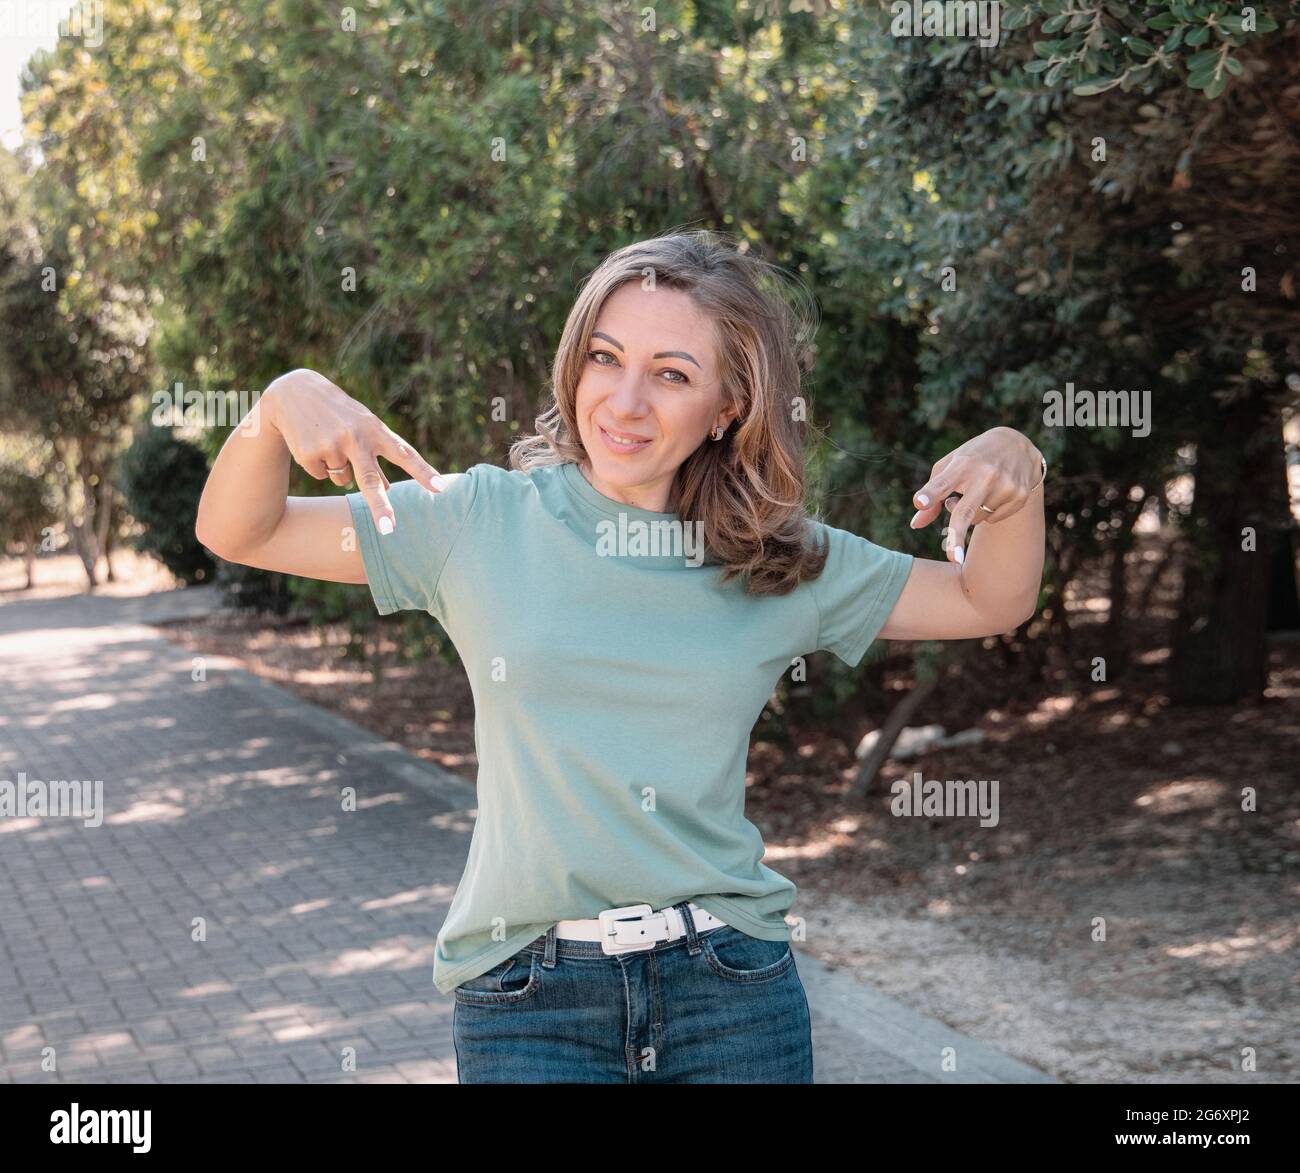 Middle aged women wearing t-shirt and jeans pointing on t-shirt stays outdoor in the park Stock Photo